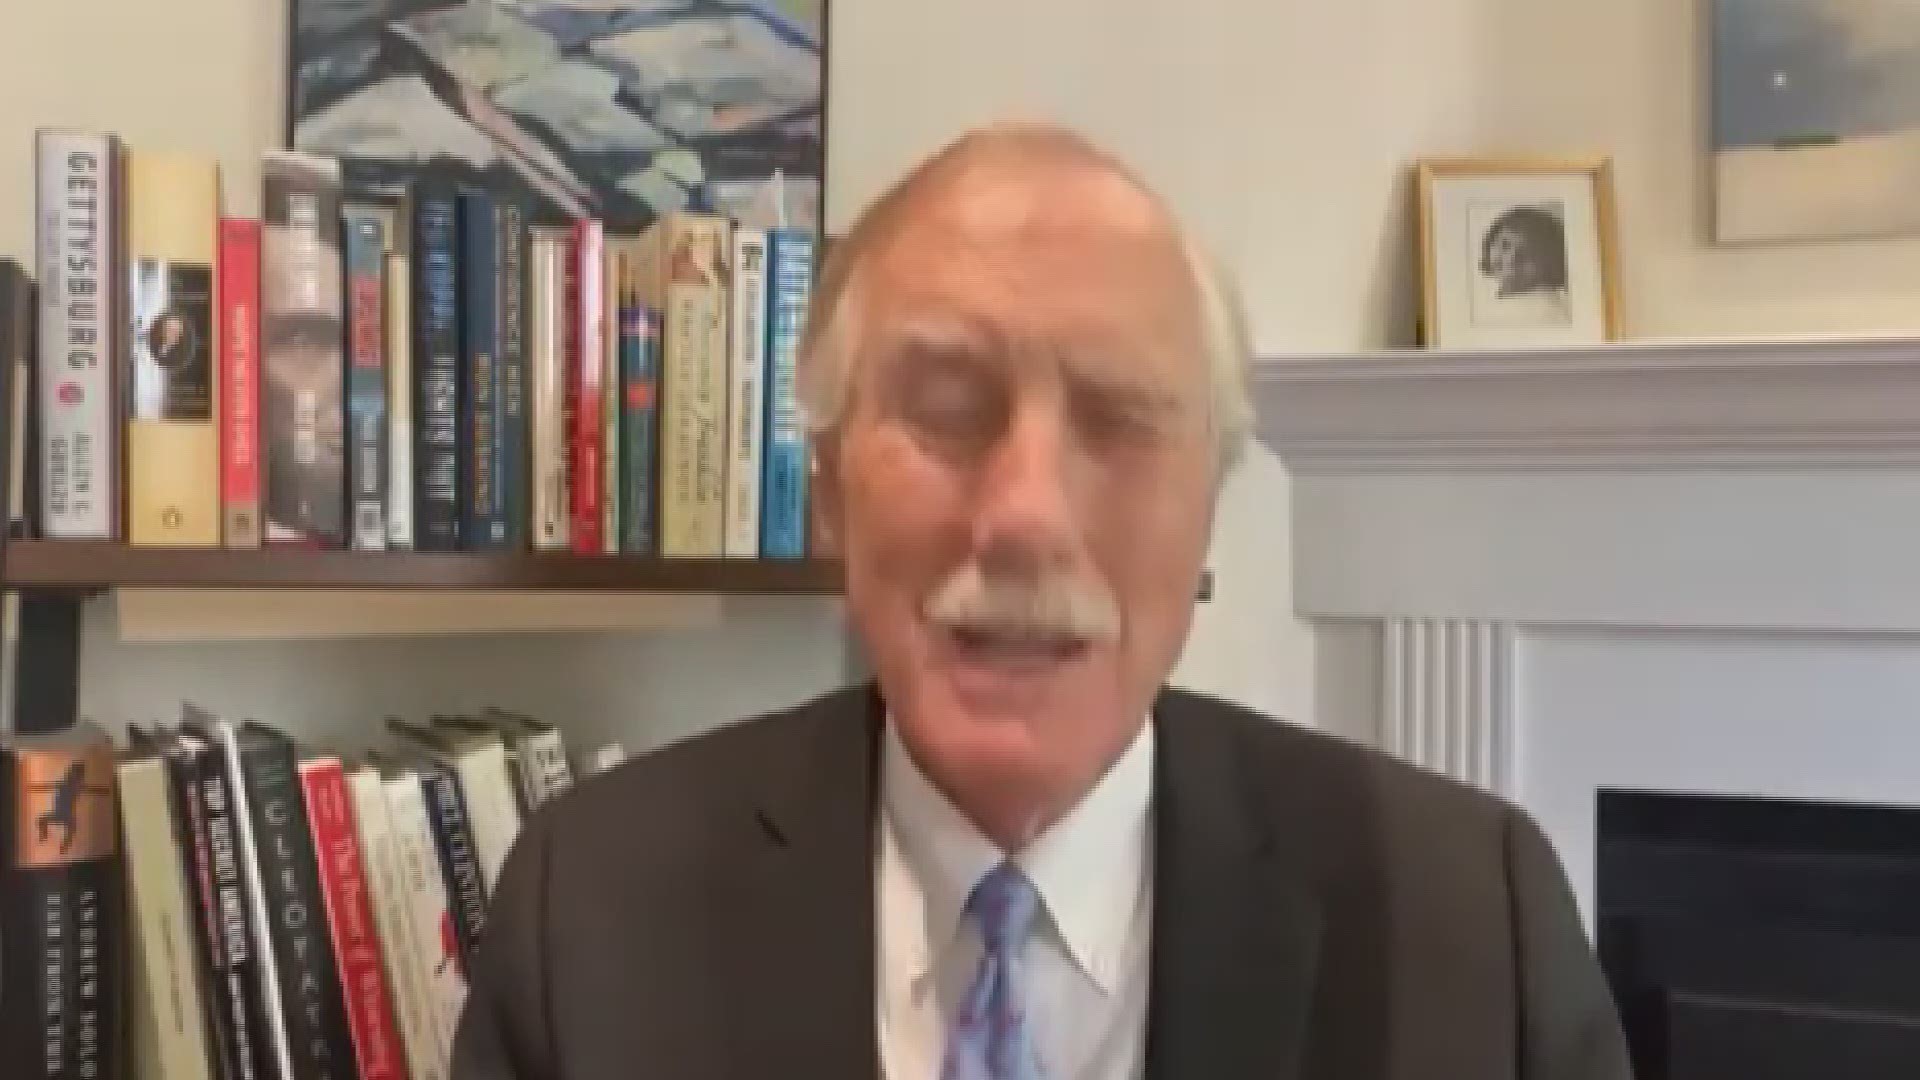 Sen. Angus King talks about the GOP policing bill that was blocked by Democrats on Wednesday